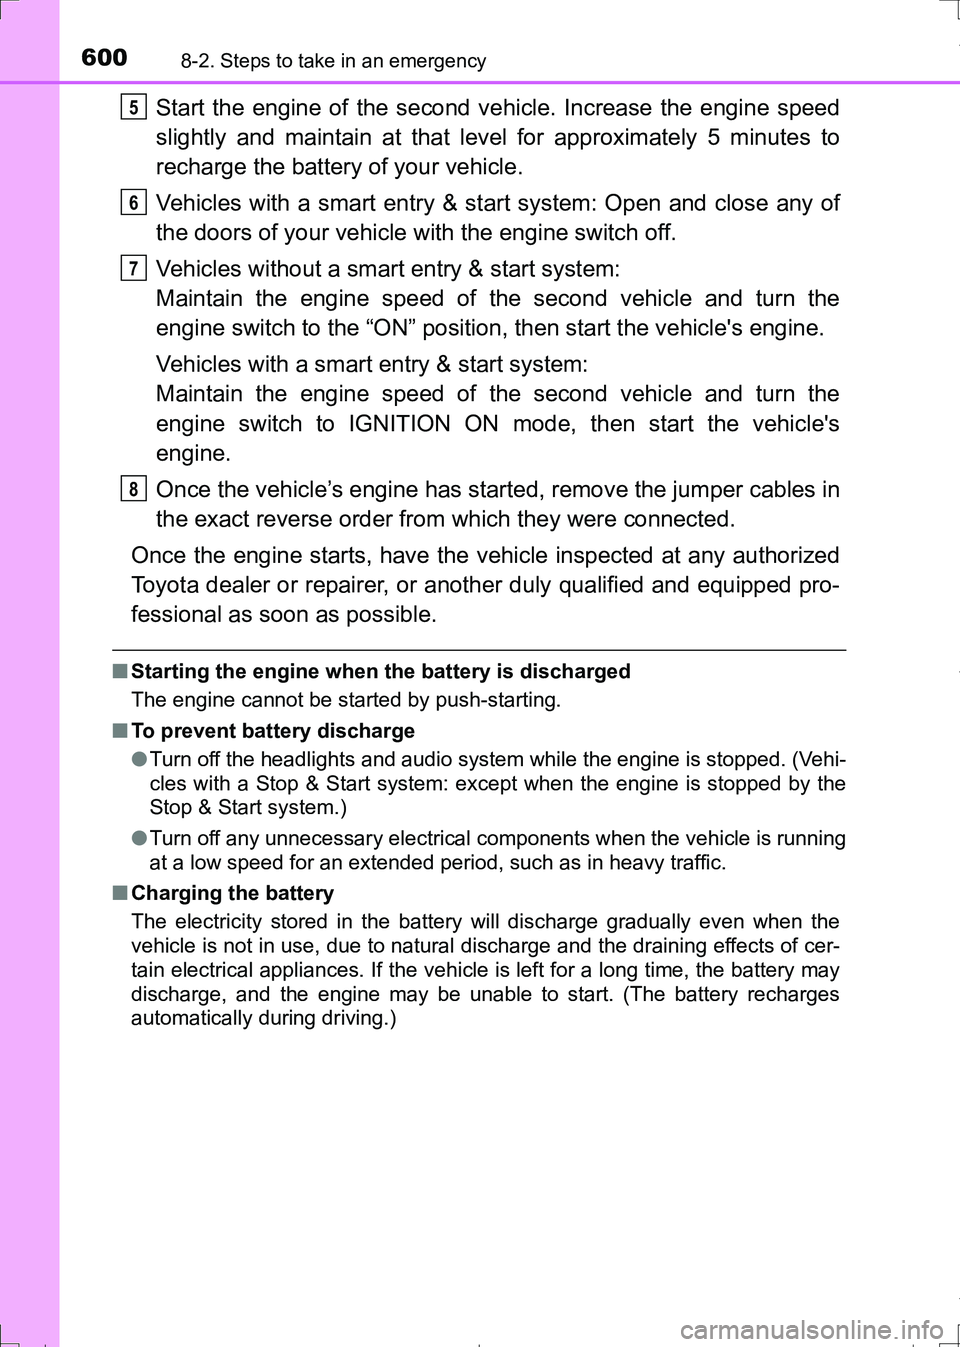 TOYOTA AURIS HYBRID 2017  Owners Manual 6008-2. Steps to take in an emergency
AURIS Touring Sports_EE (12L13E)
Start the engine of the second vehicle. Increase the engine speed
slightly and maintain at that level for approximately 5 minutes